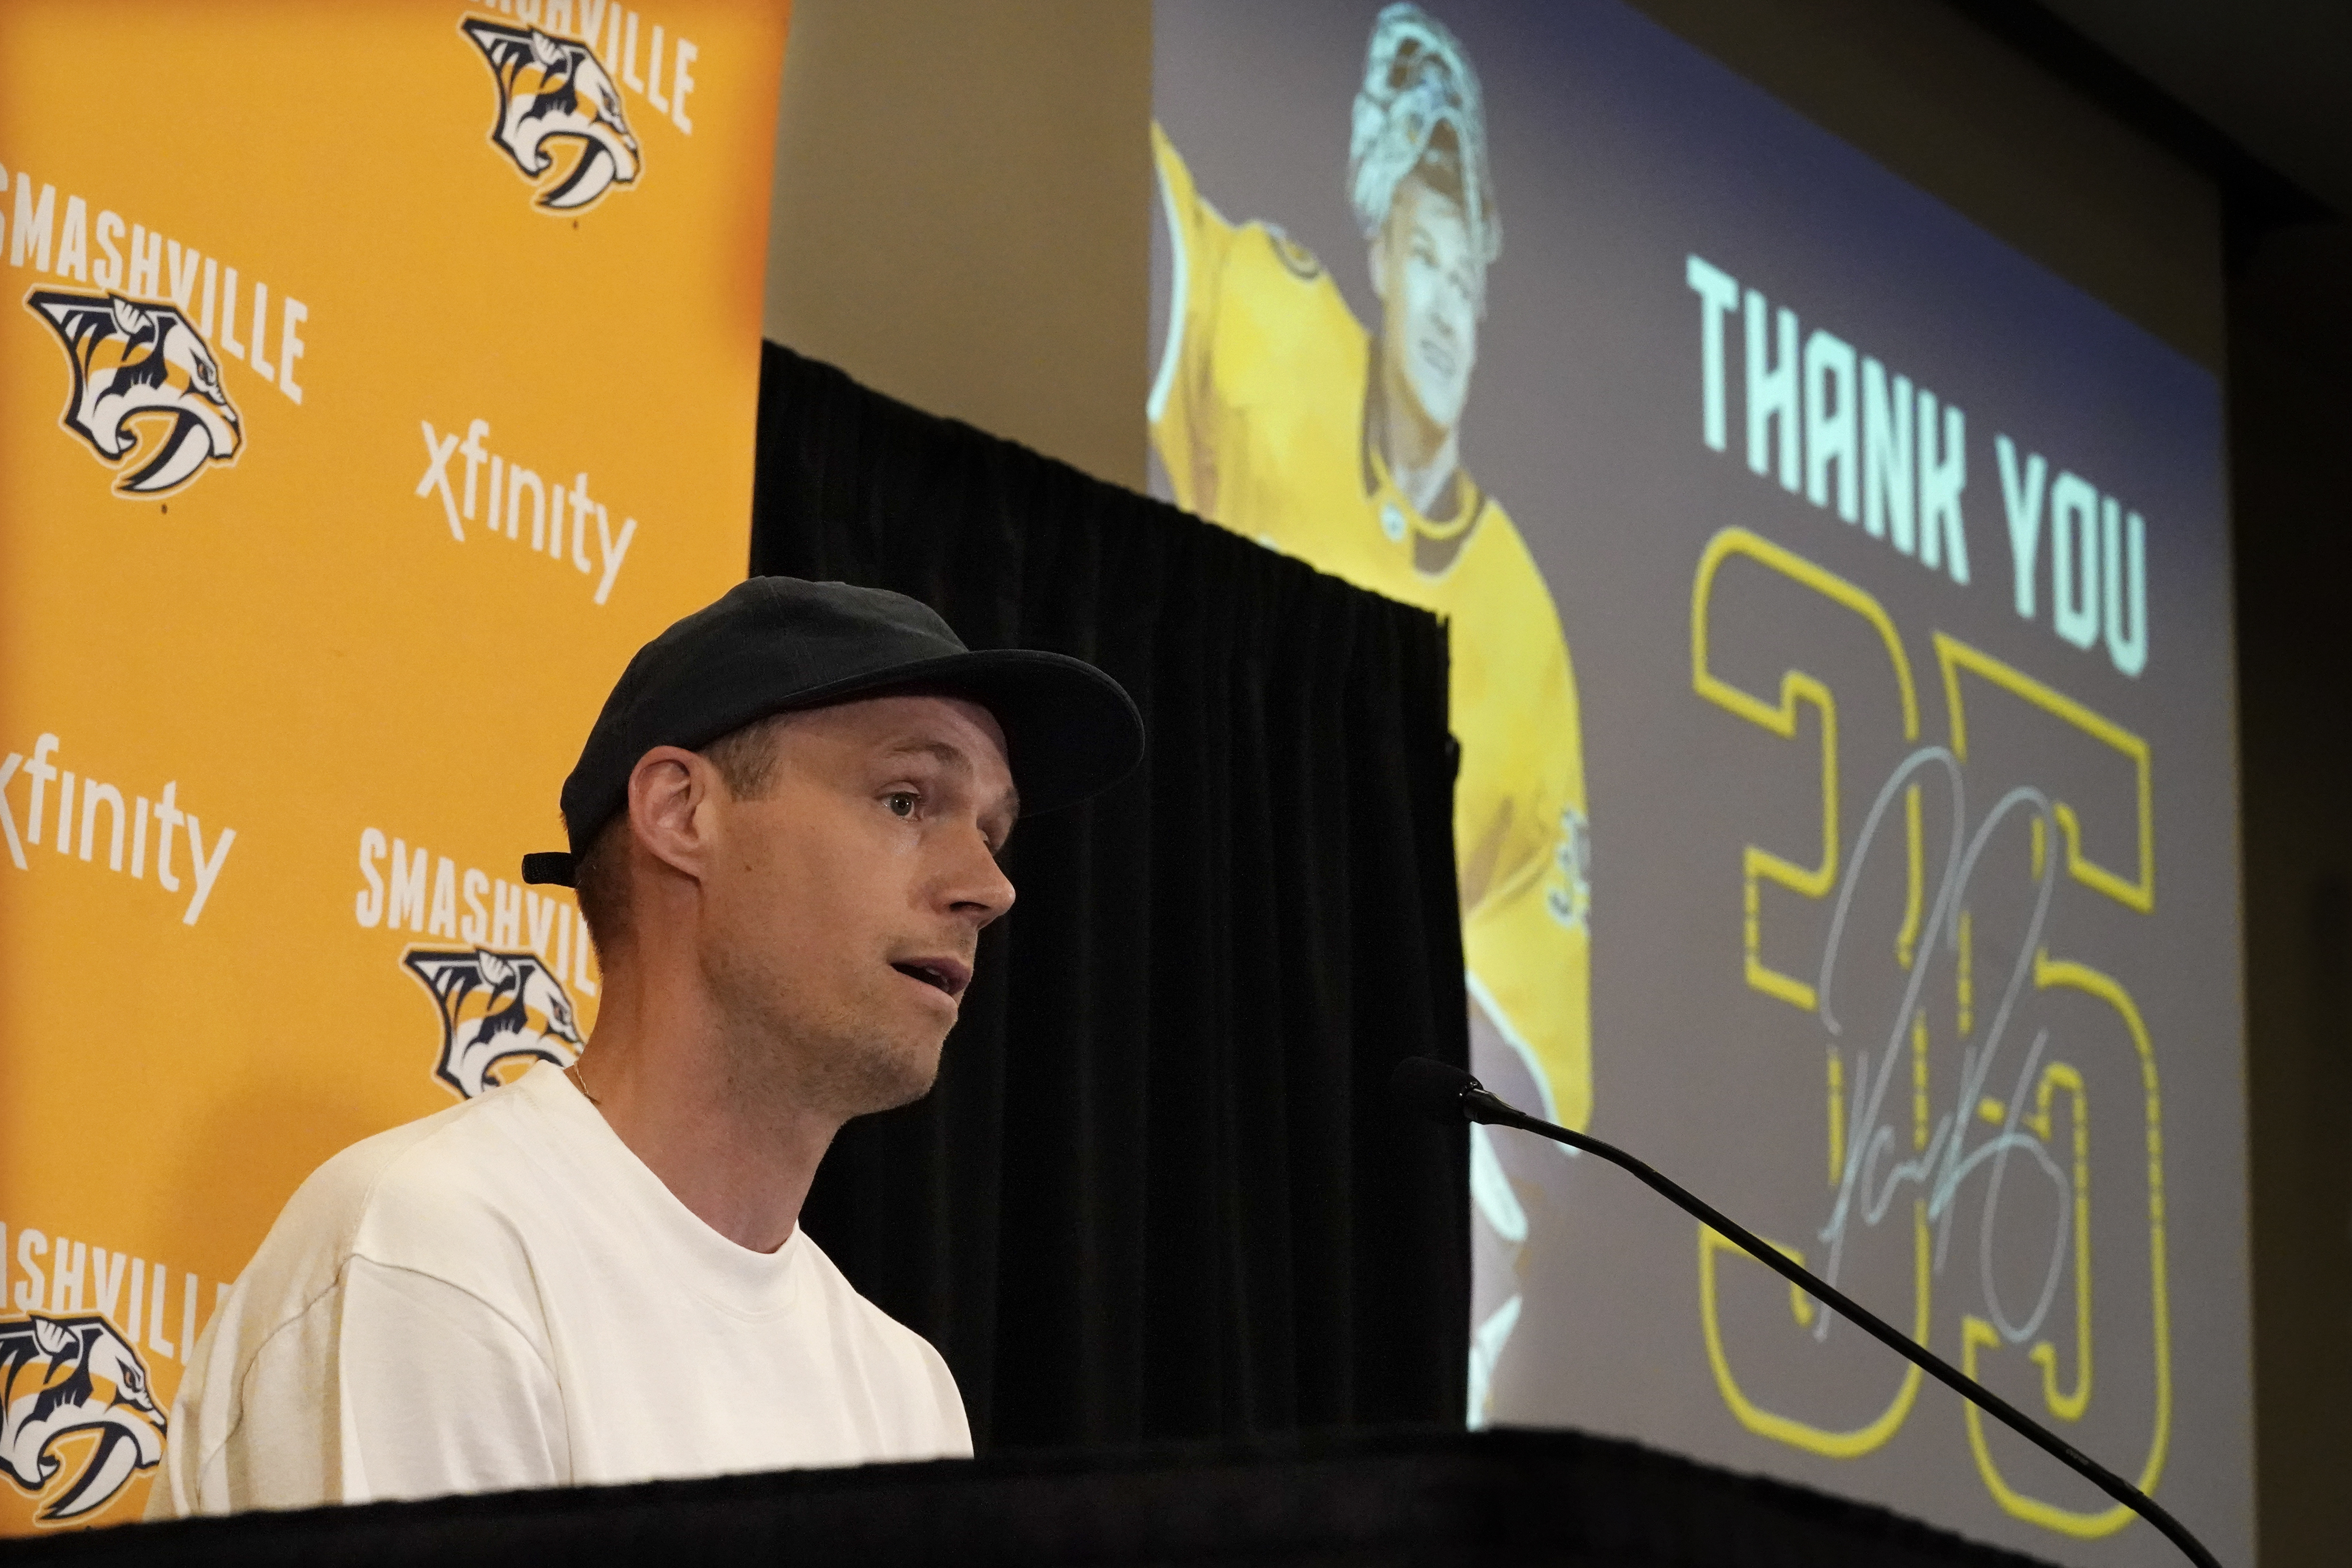 Meet Pekka Rinne's son, Breaking baby news: Pekka Rinne sent this video  out thanking Preds staff for their donations to the 365 Fund (donate here:  bit.ly/37mEeAg) AND announced